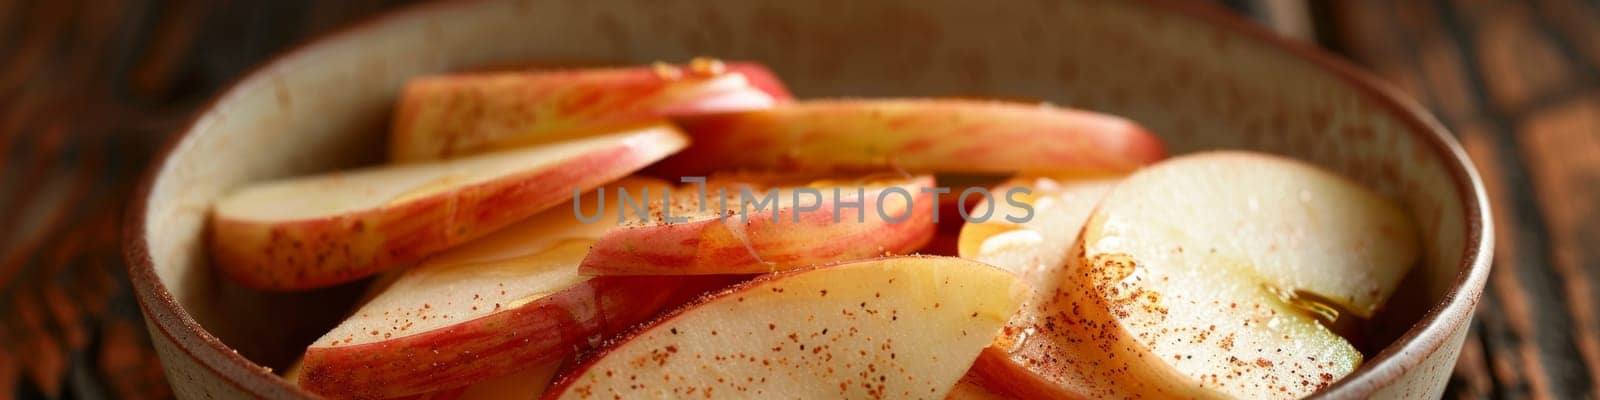 A bowl of sliced apples on a wooden table with brown background